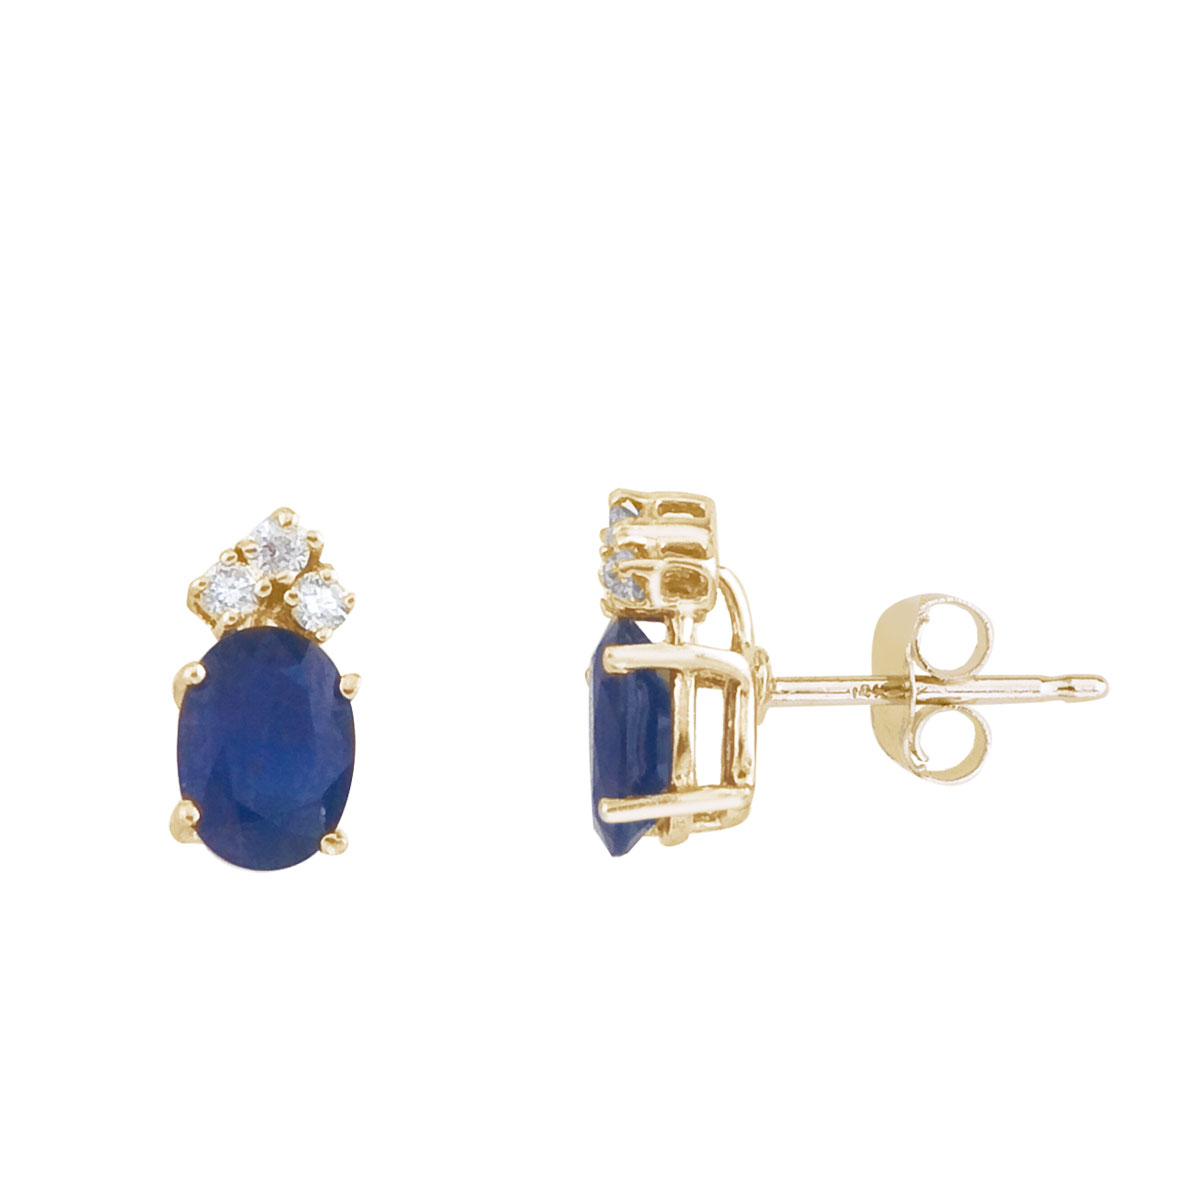 JCX2246: These 7x5 mm oval shaped sapphire earrings are set in beautiful 14k yellow gold and feature .12 total carat diamonds.